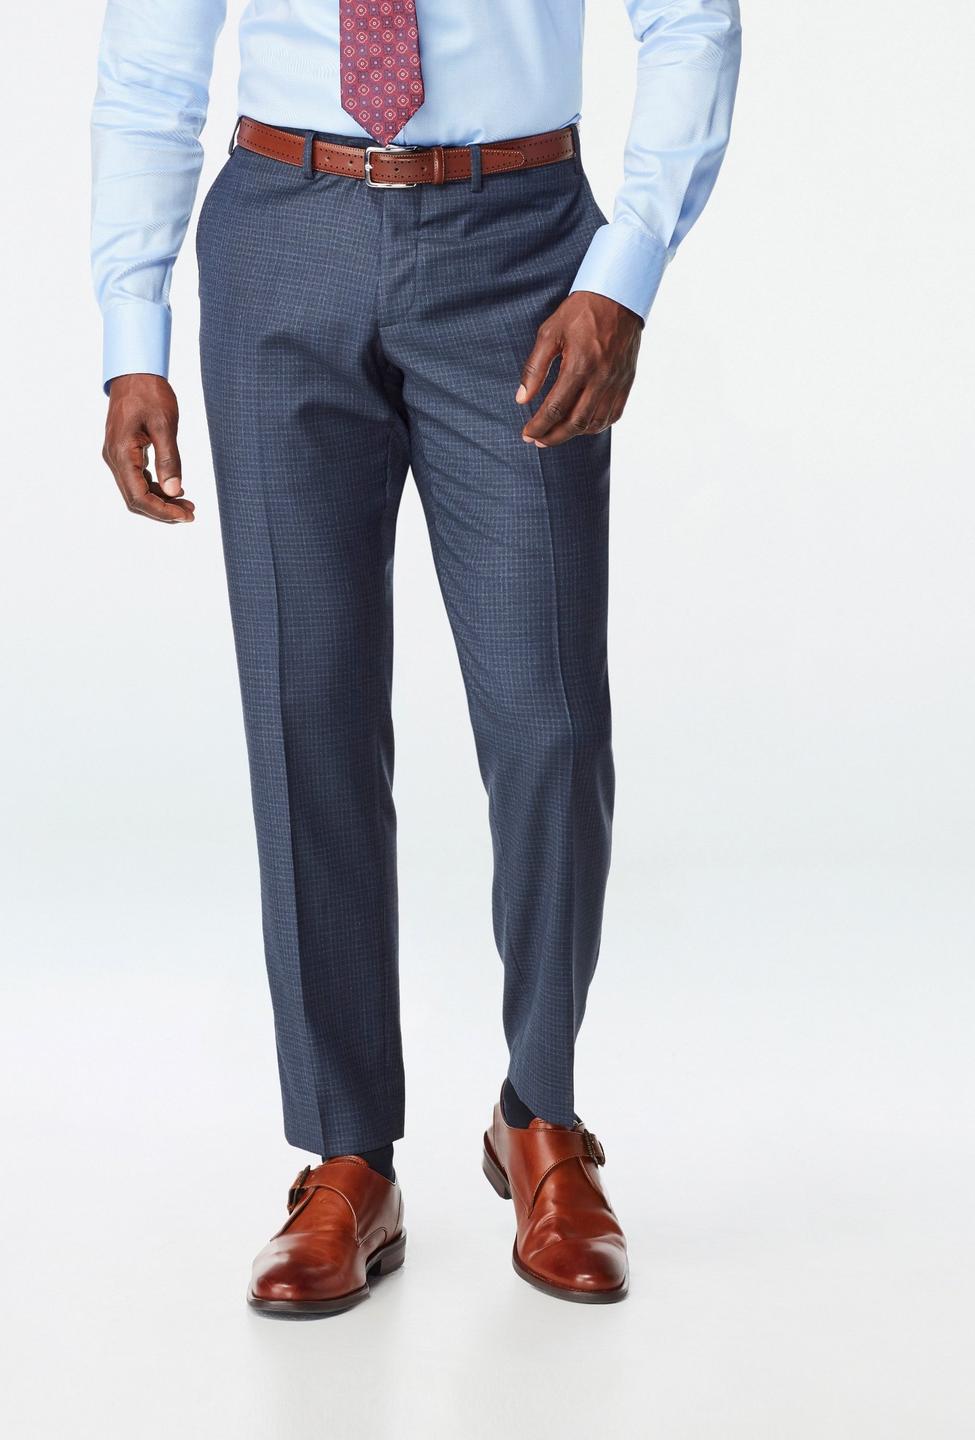 Blue pants - Dunmow Checked Design from Seasonal Indochino Collection